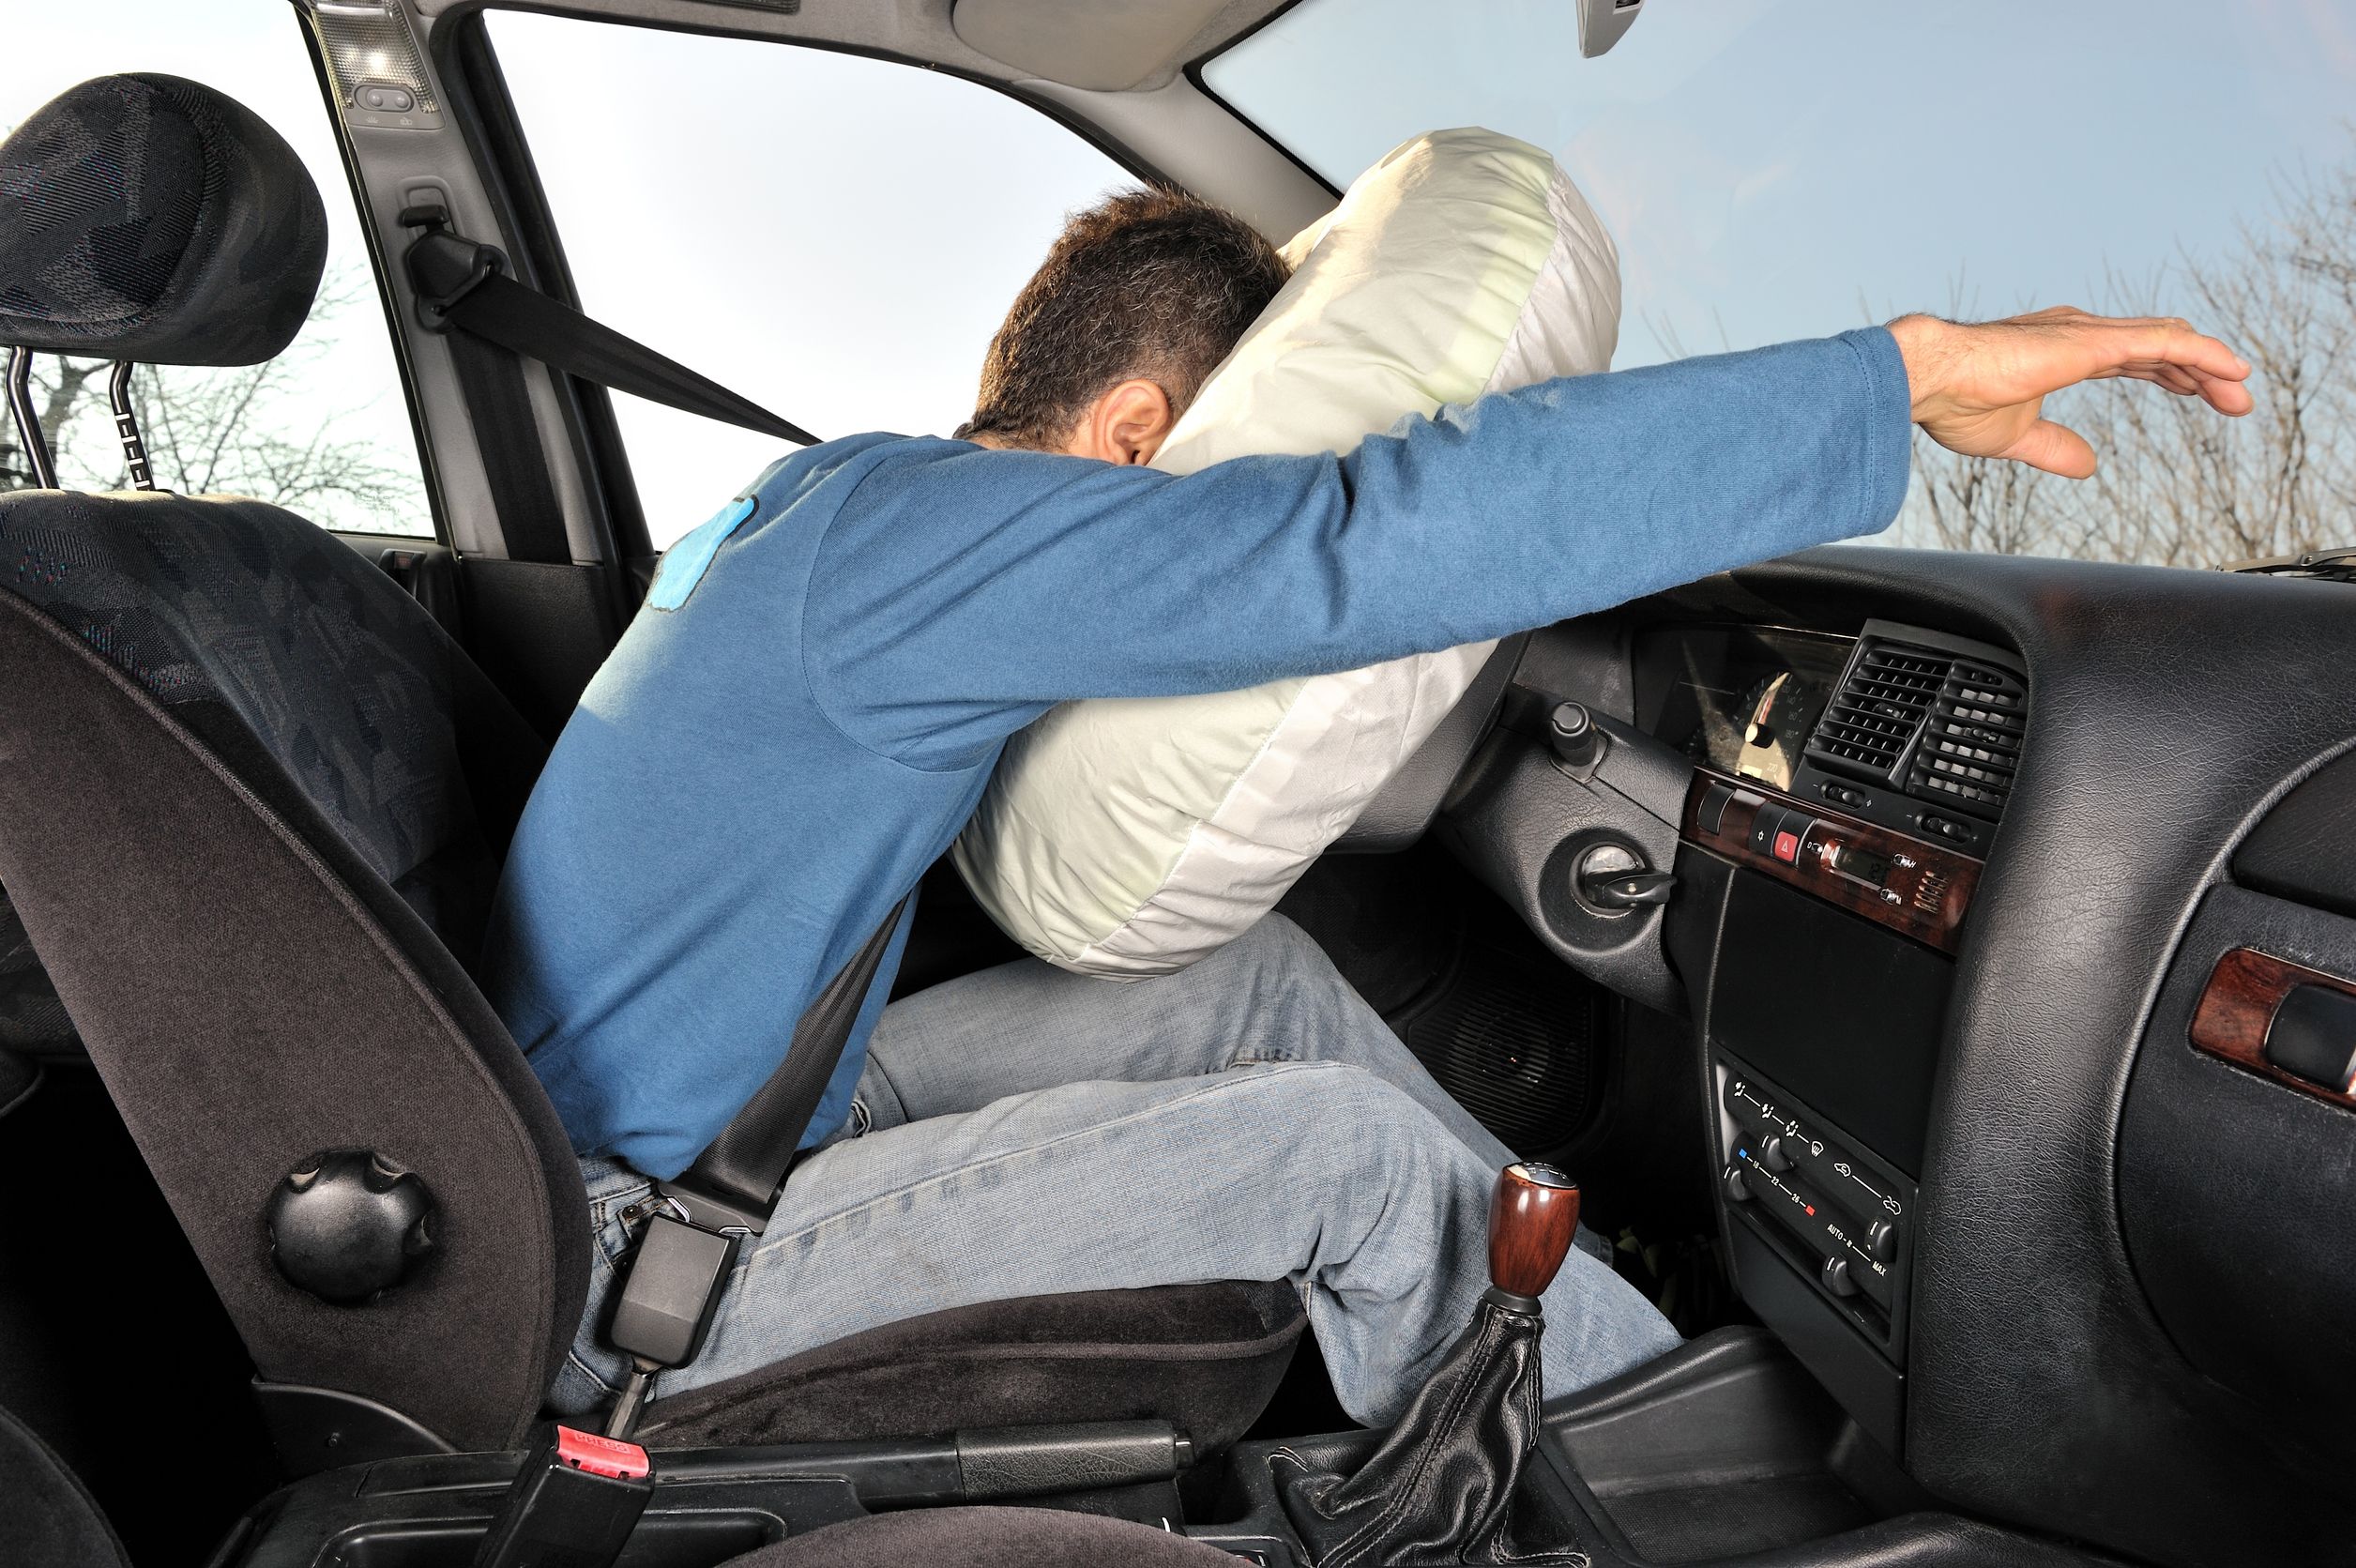 Passenger Seat Air Bag to Be Deployed in All Taxis | Be Korea-savvy